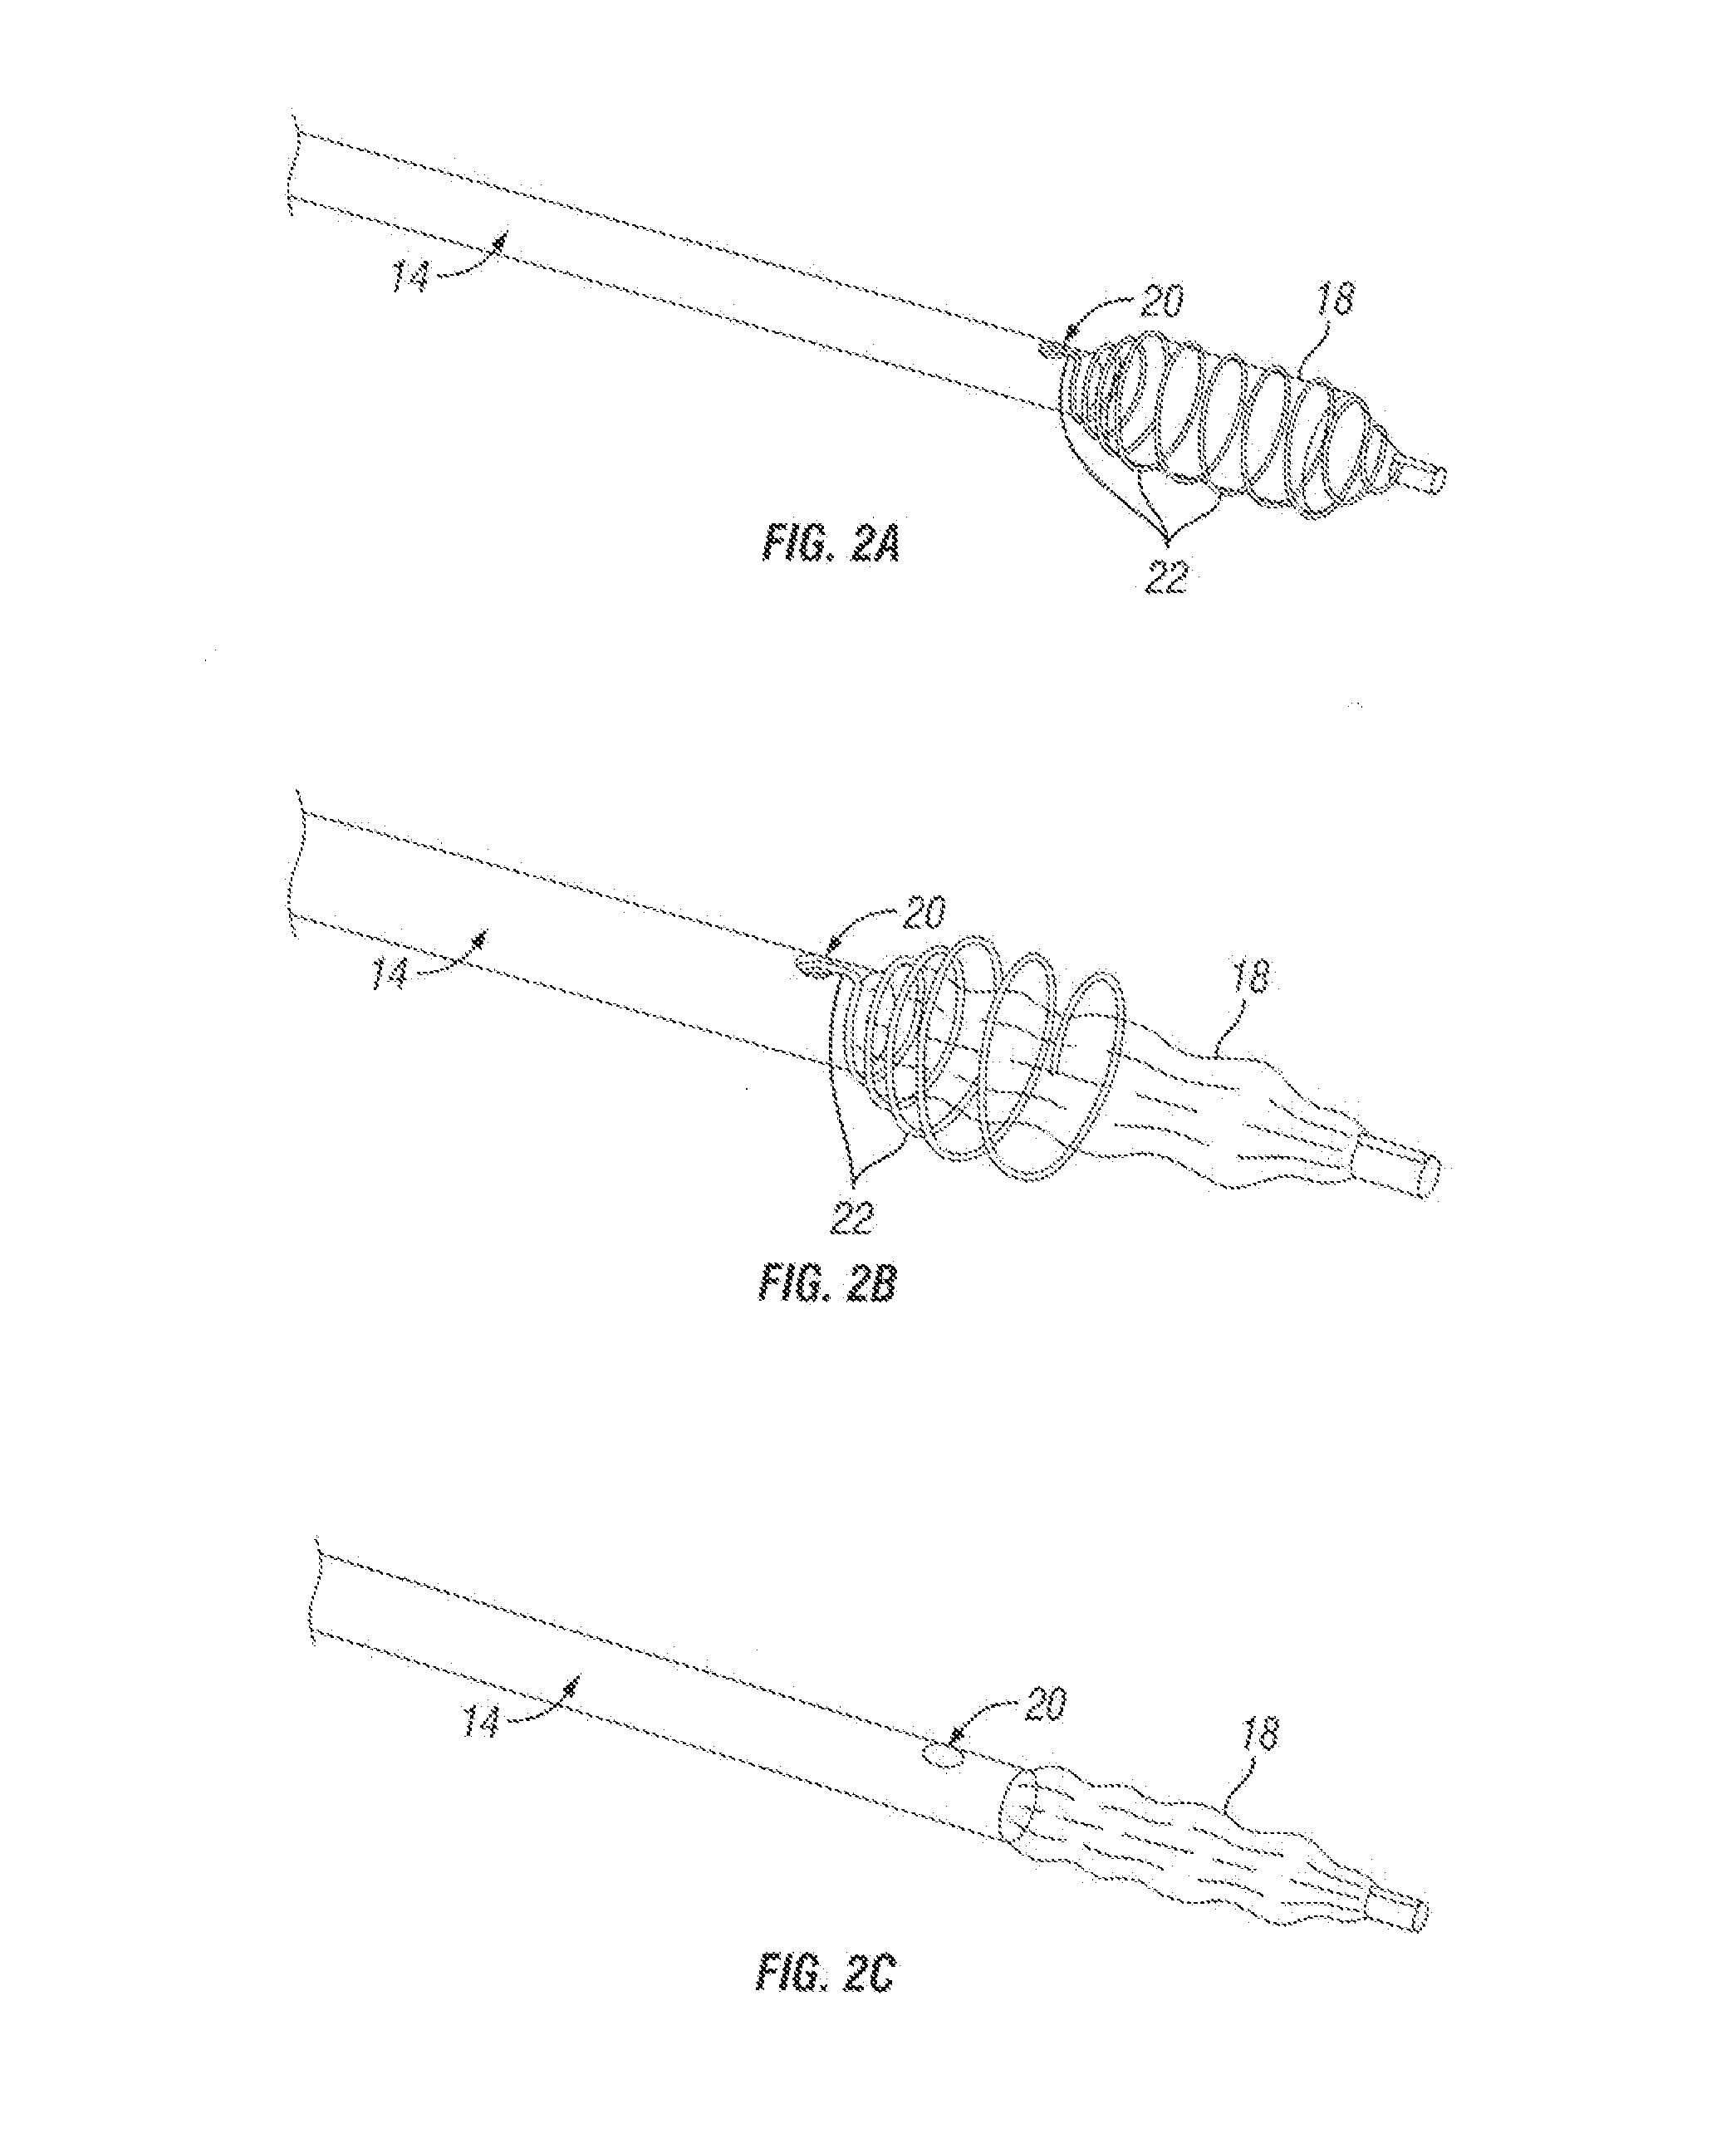 Angioplasty balloon having selectively deployable cutting or scoring element and related methods